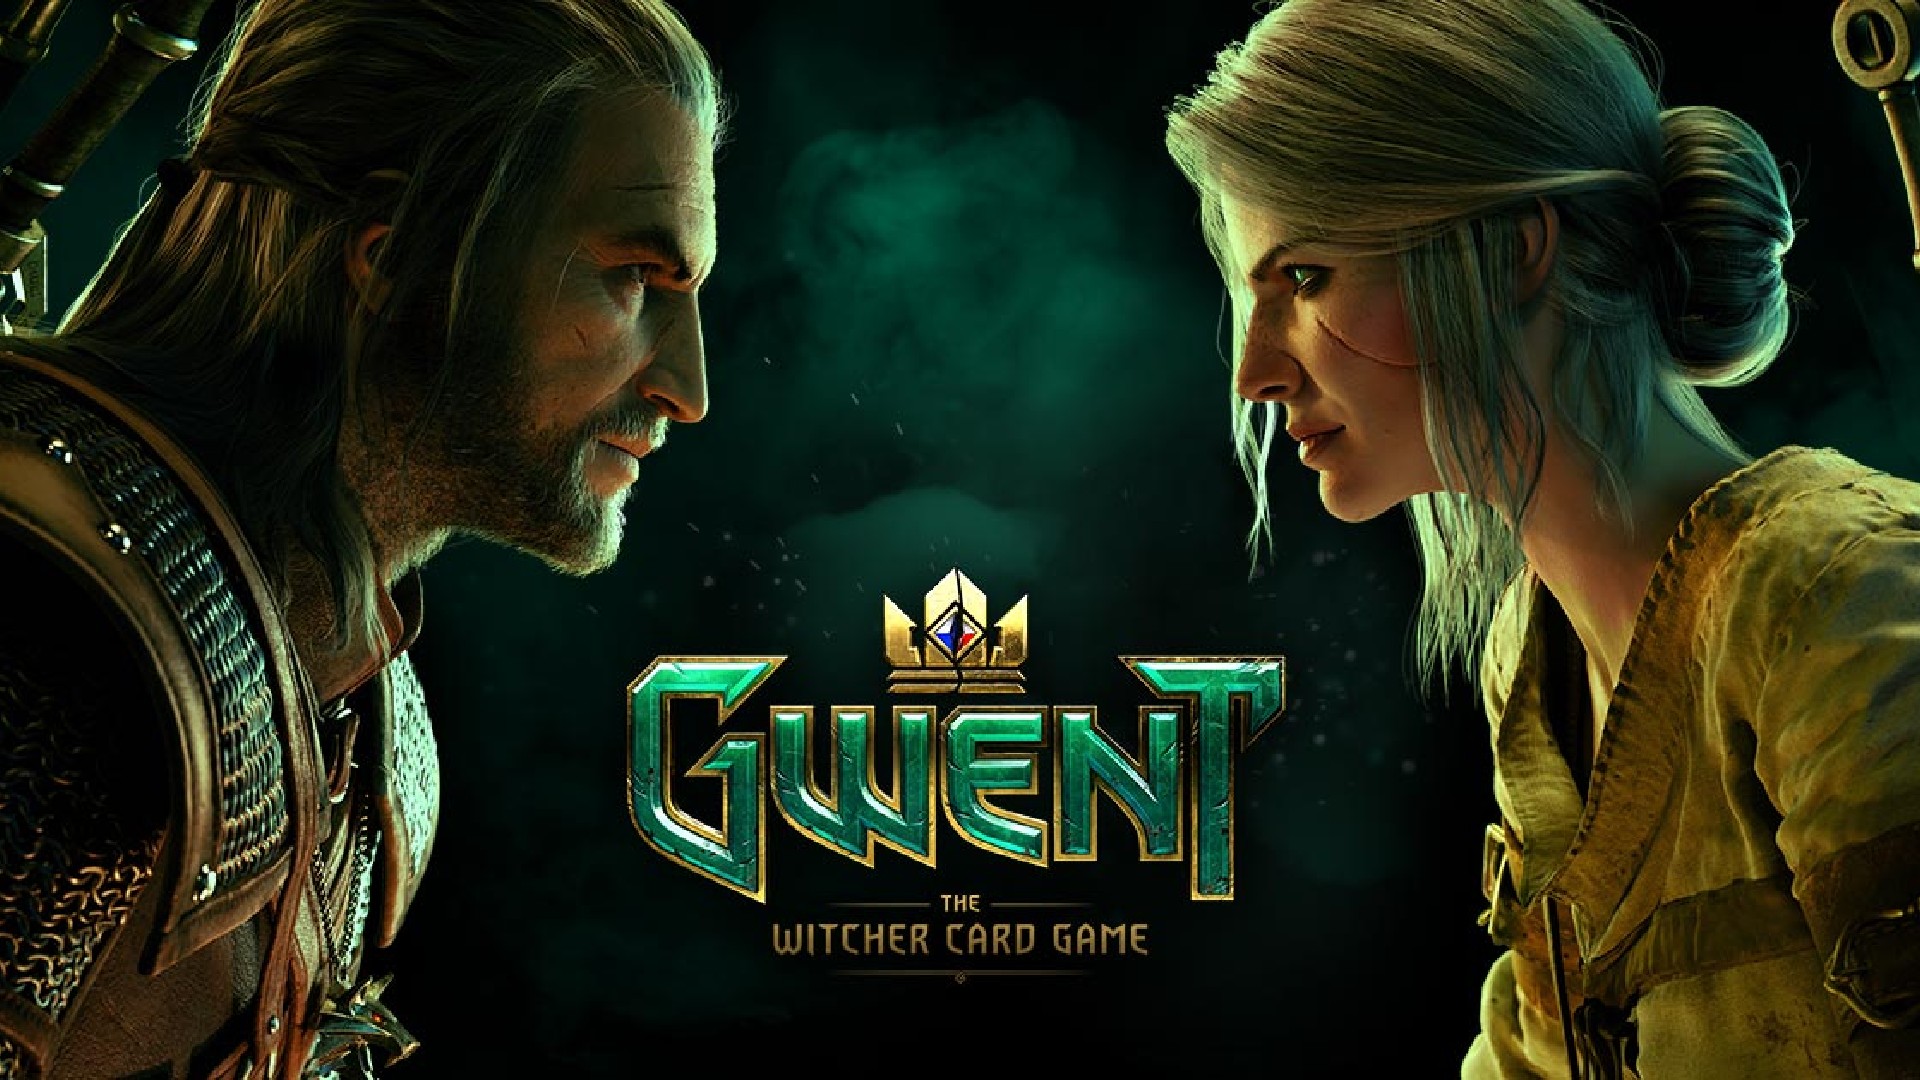 Geralt and Ciri stare each other down in Gwent: The Witcher Card Game